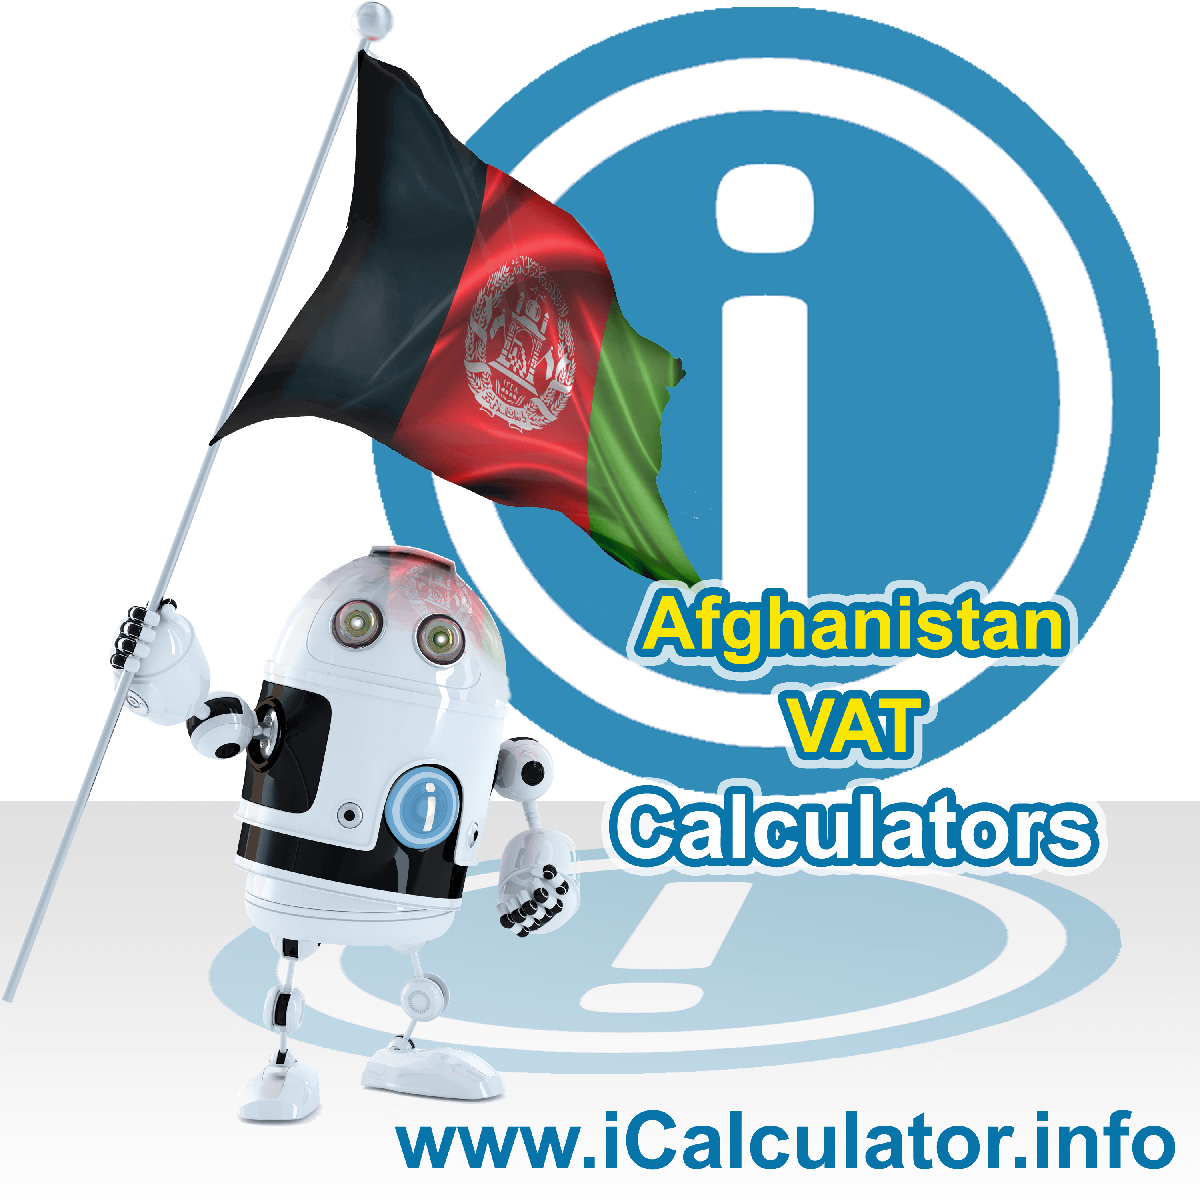 Afghanistan VAT Calculator. This image shows the Afghanistan flag and information relating to the VAT formula used for calculating Value Added Tax in Afghanistan using the Afghanistan VAT Calculator in 2023